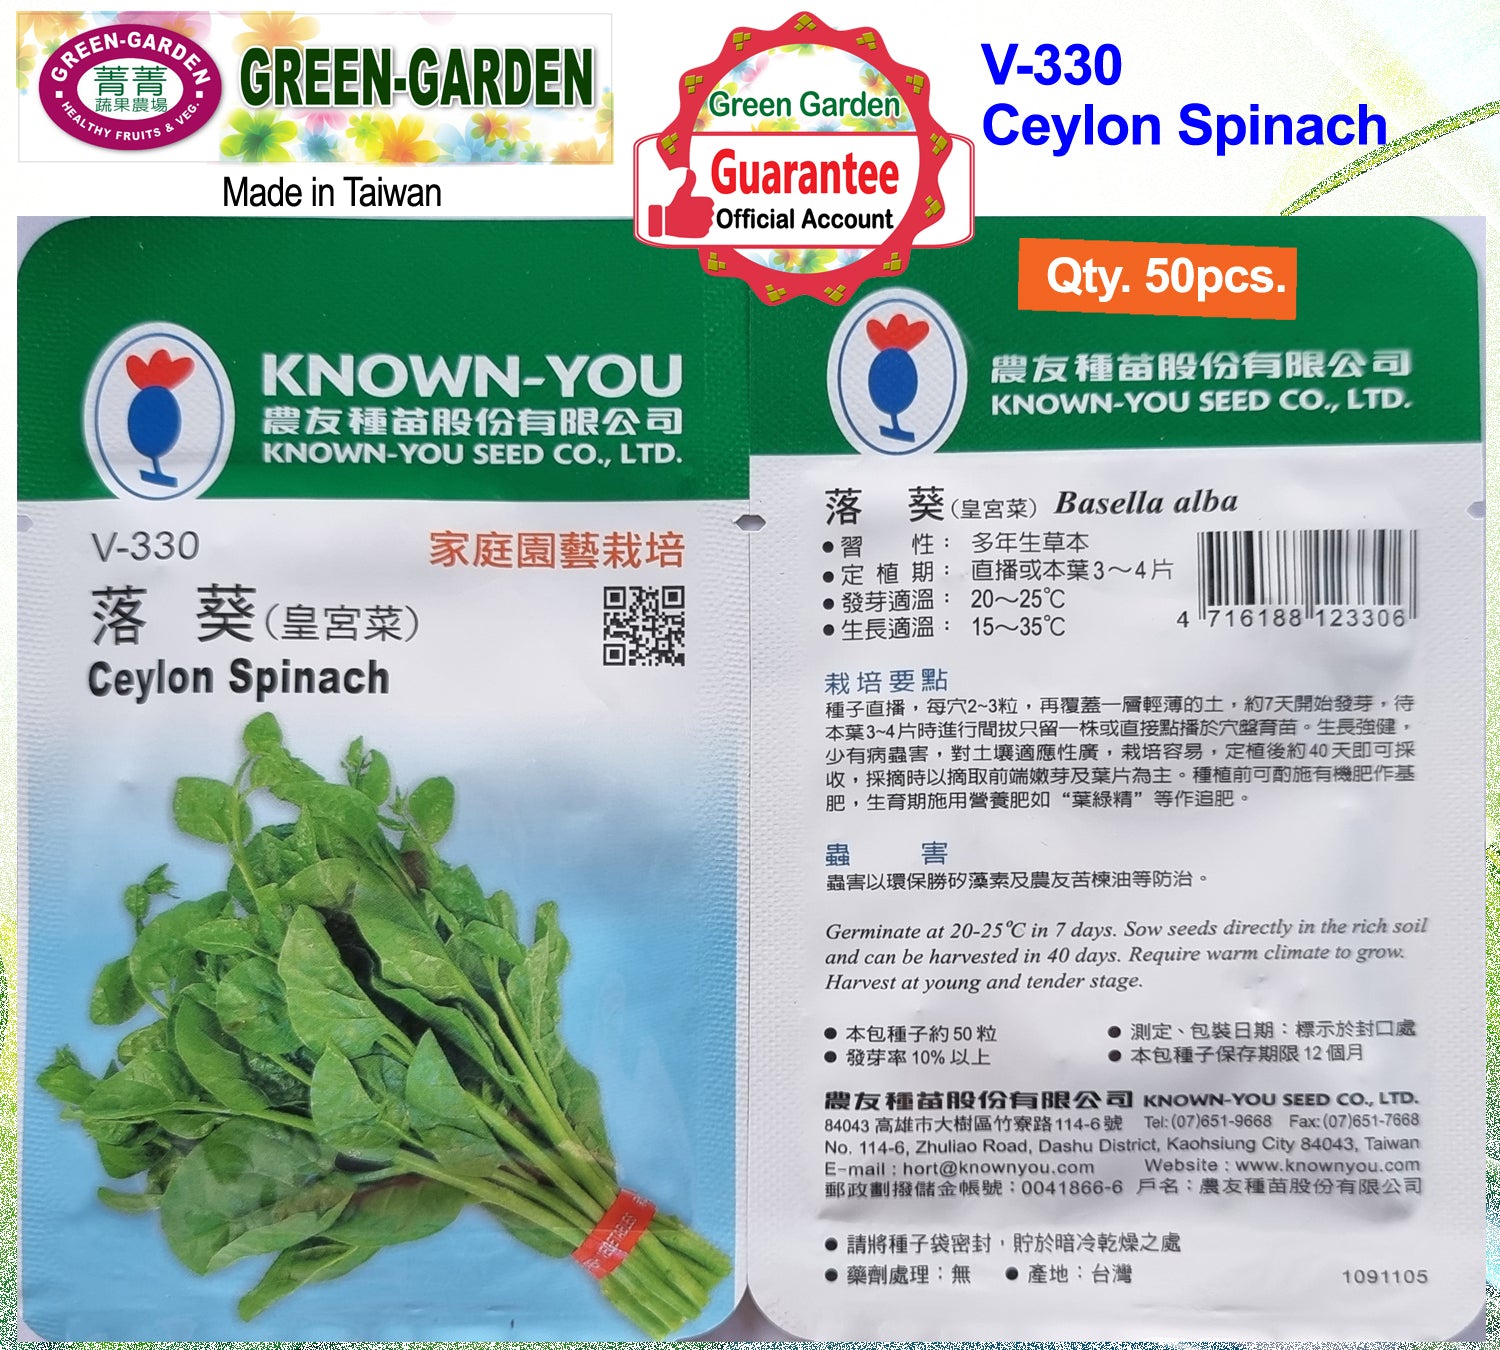 Known You Vegetable Seeds (V-330 Ceylon Spinach)